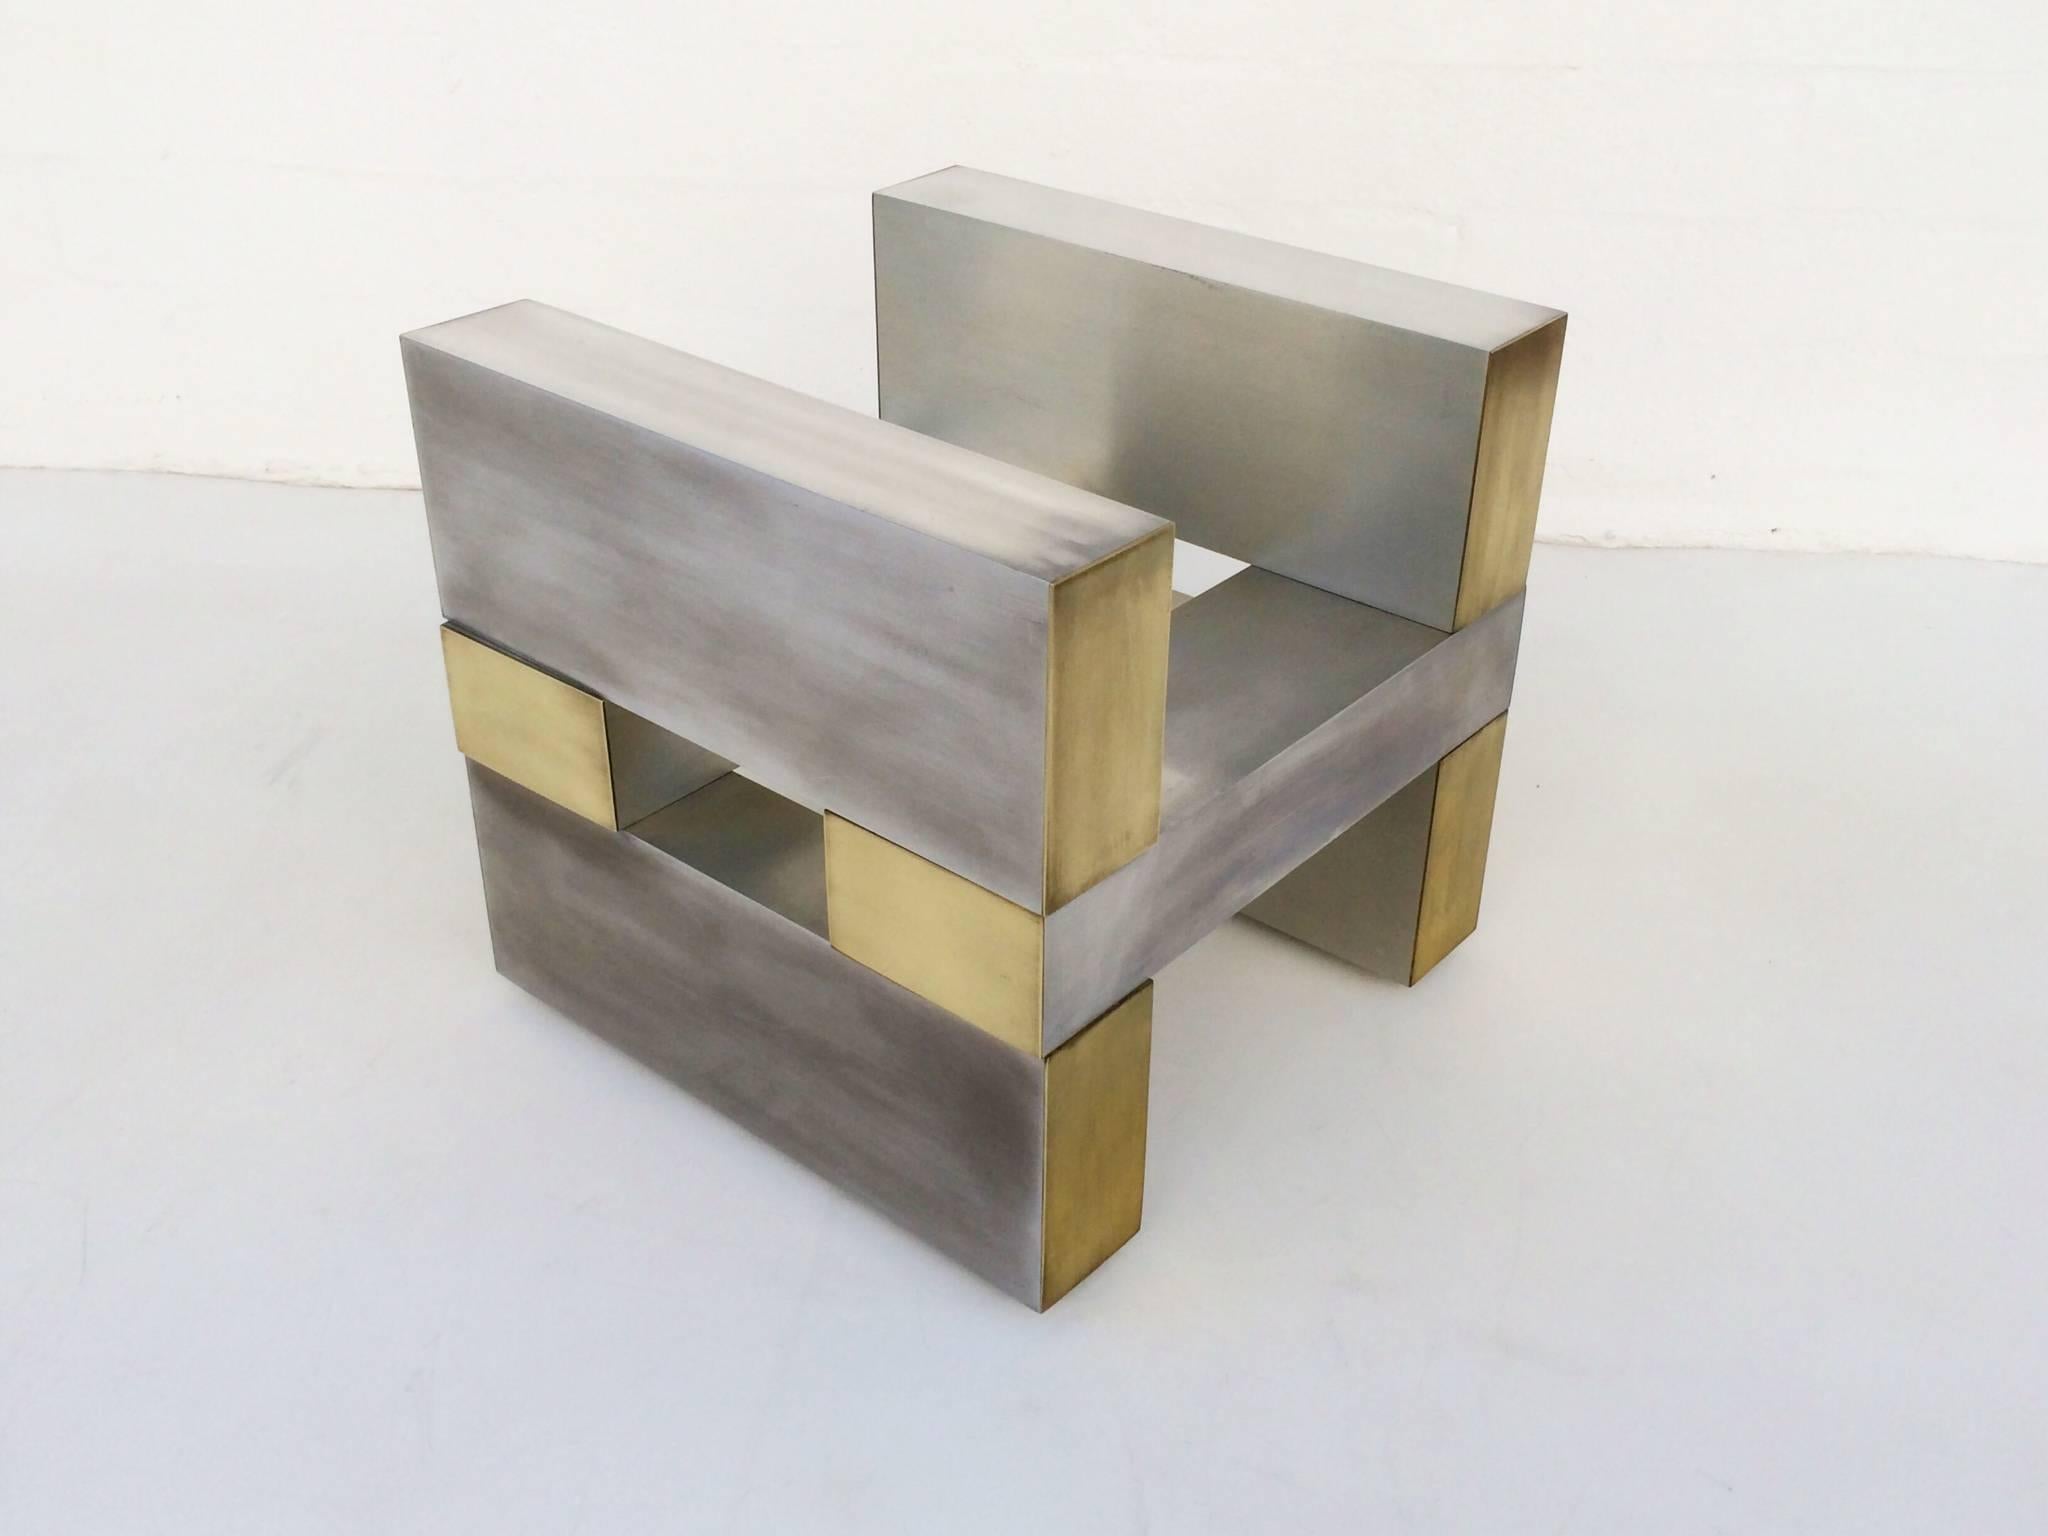 Aluminum and brass cocktail table base designed by Paul Mayen, circa 1970s. 
Made by Habitat international. 
We have priced this without the glass top to make shipping easier, but can include a new glass top for an additional charge.